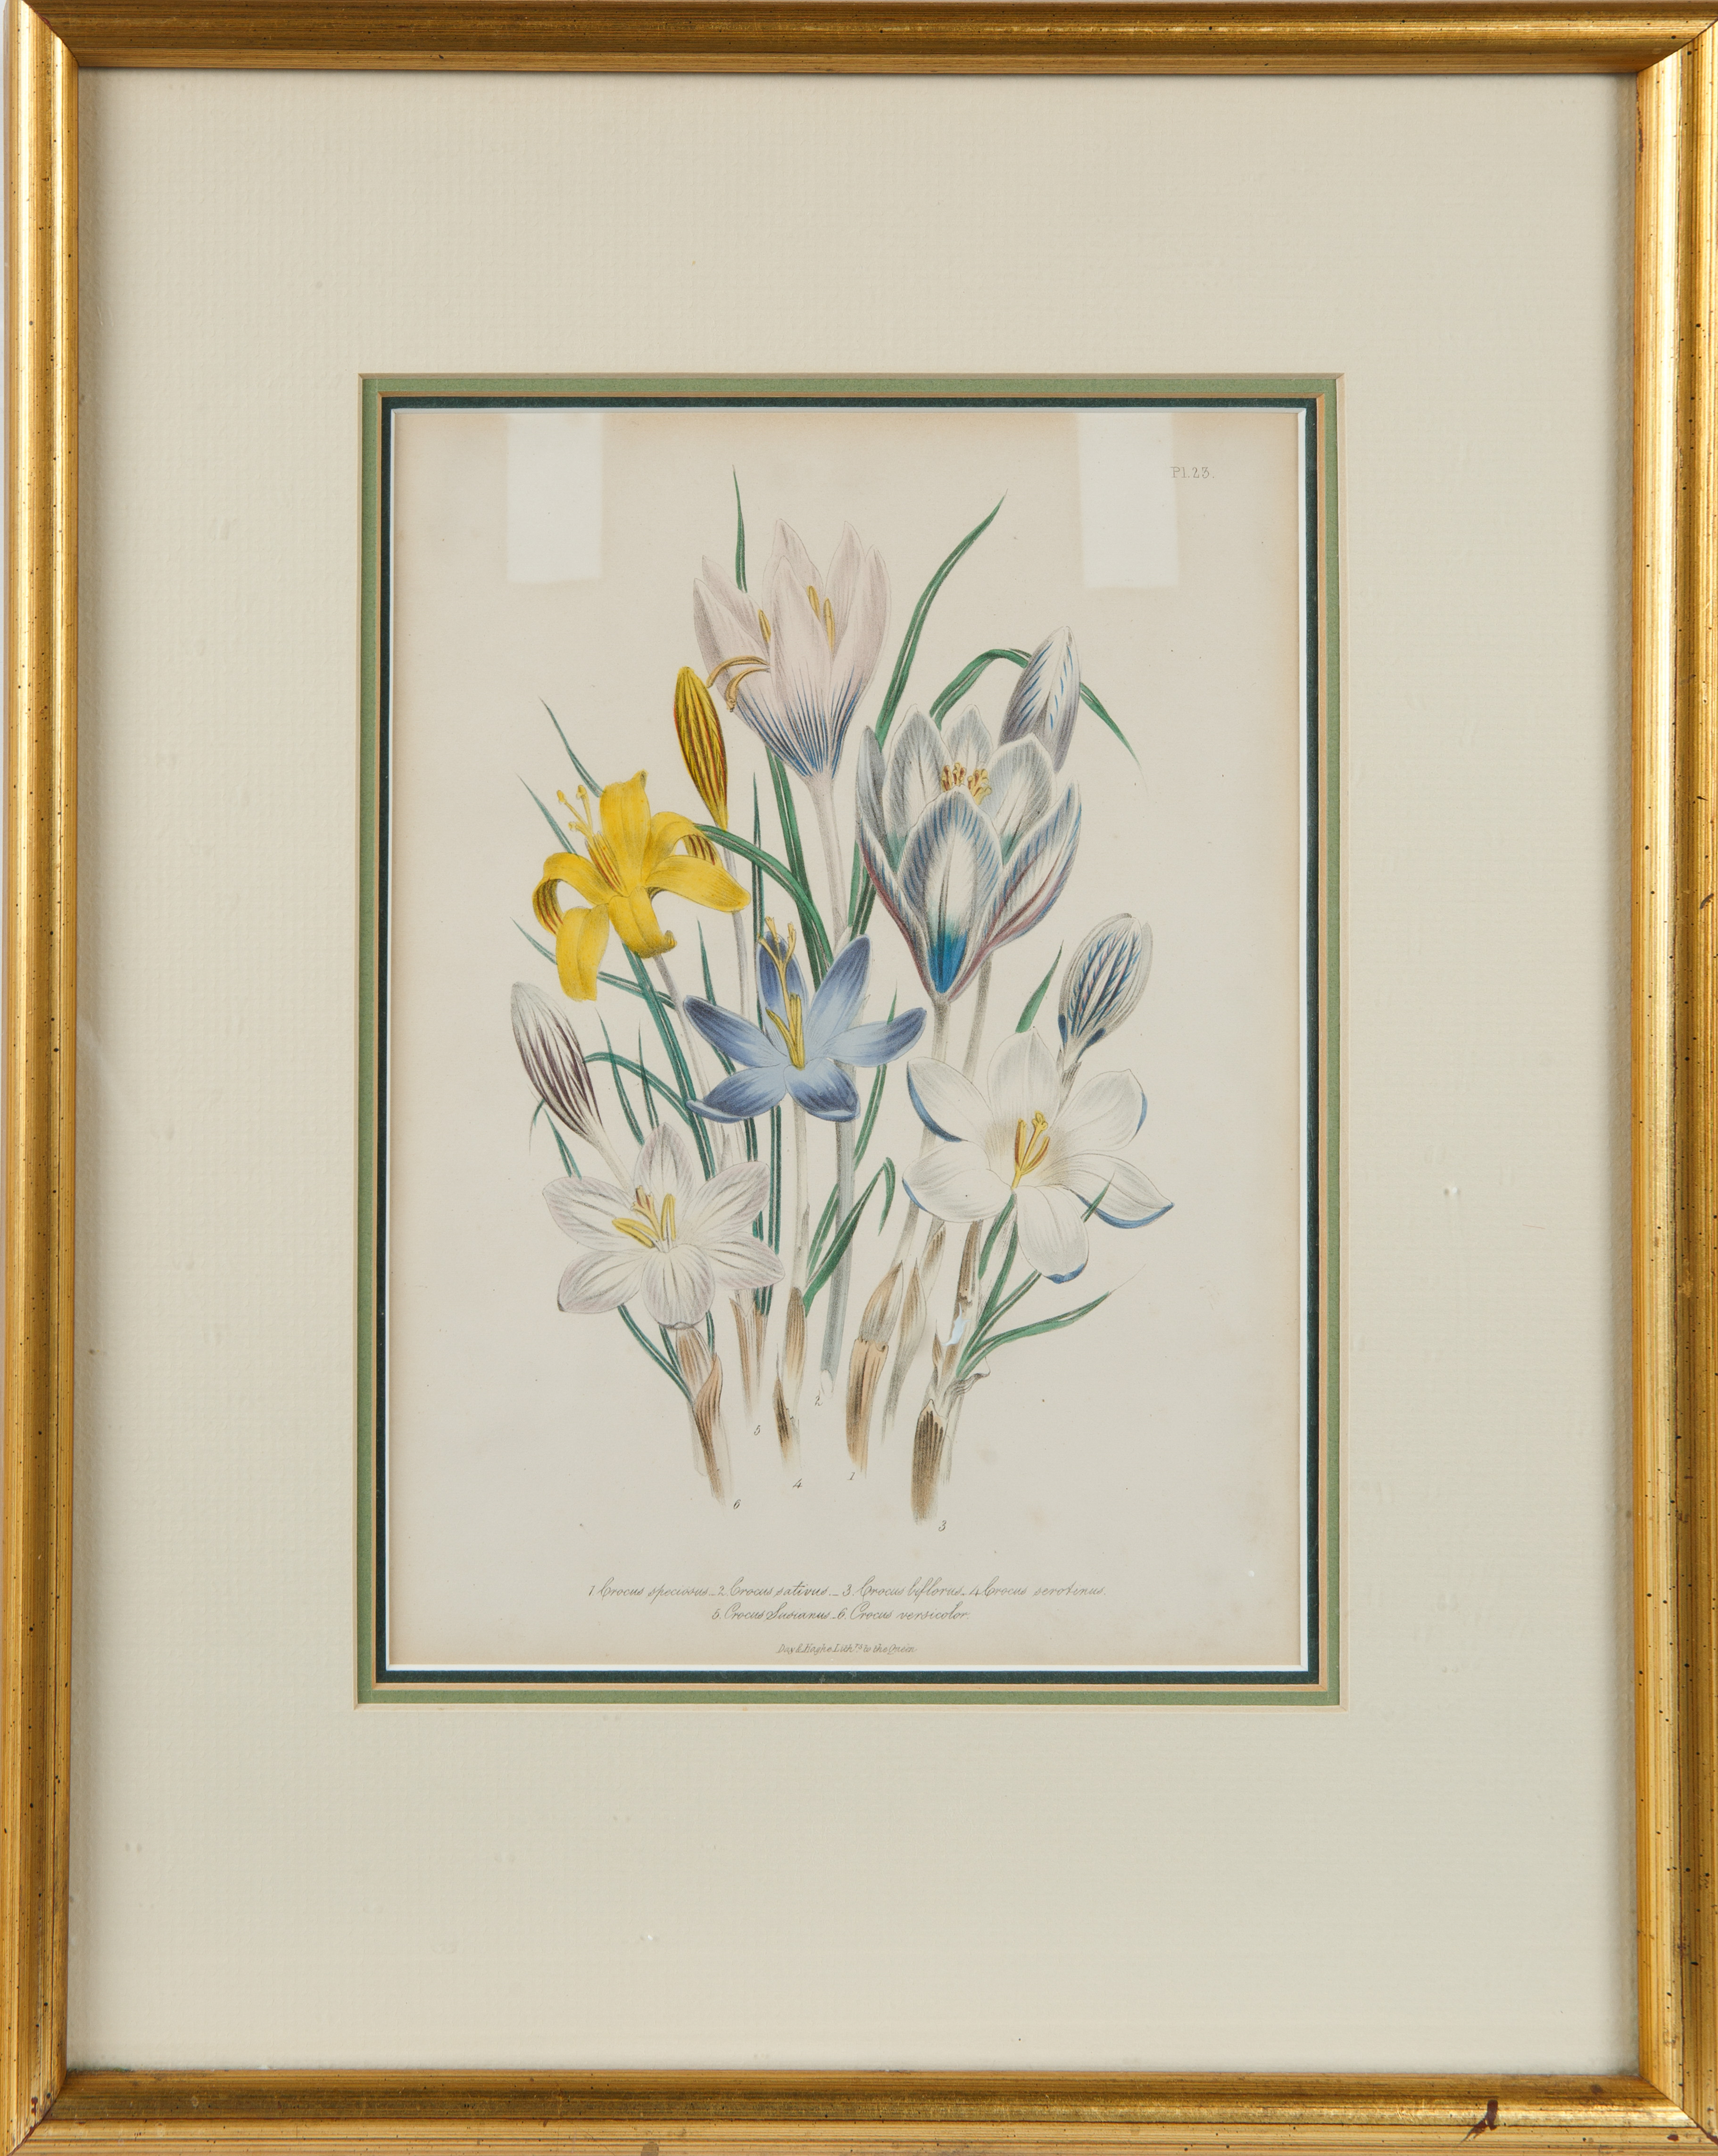 A COLORED BOTANICAL ENGRAVING, PUBLISHED BY DAY AND HAGHE ERITH TO THE QUEEN, LATE 19TH-EARLY 20TH C - Image 2 of 4